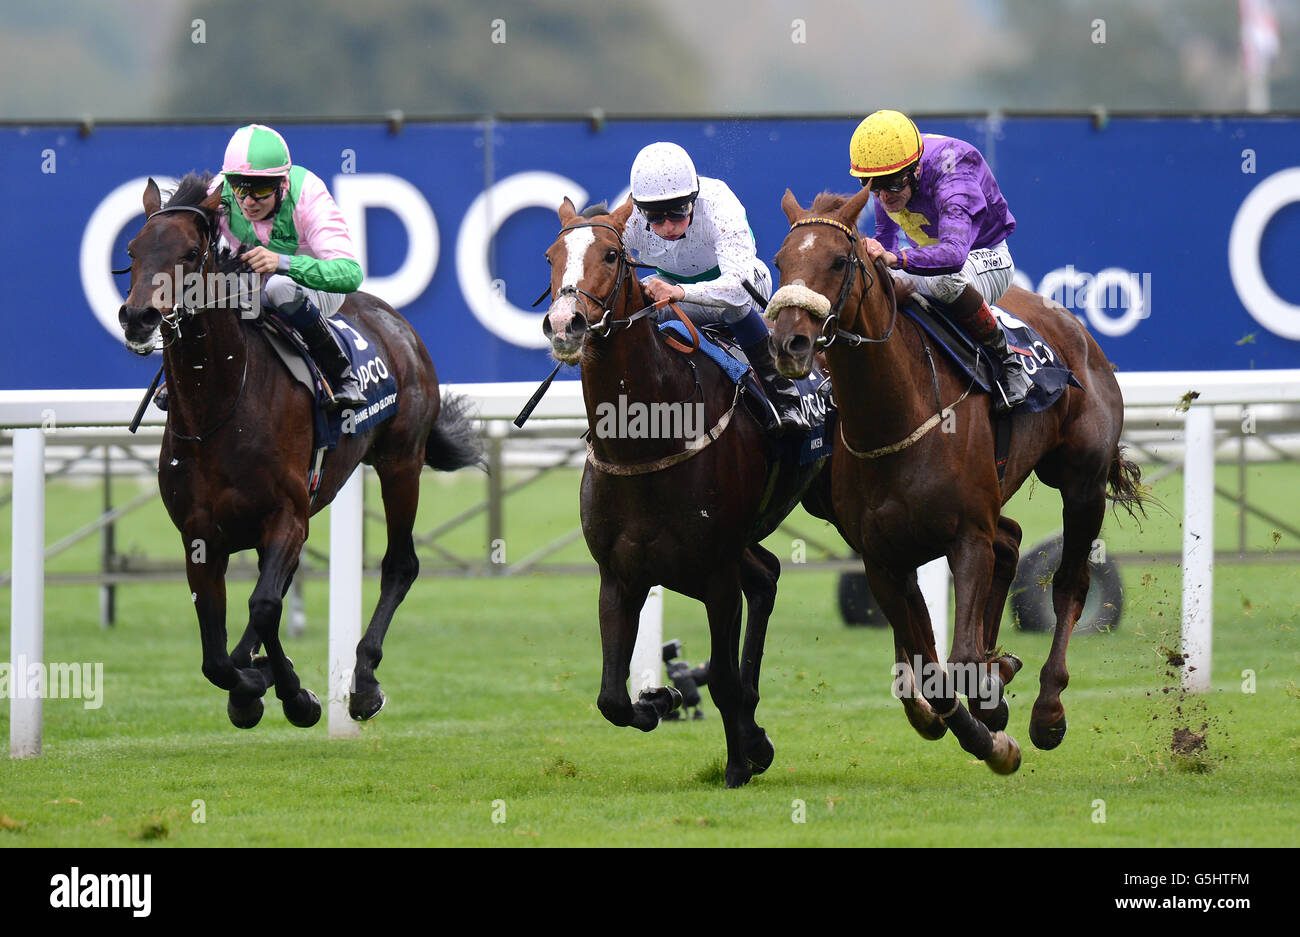 Rite Of Passage ridden by Pat Smullen (right) winners of The Qipco British Champions Long Distance Cup (class 1) (Group 3) from Aiken ridden by William Buick (centre) and Fame and Glory ridden by Jamie Spencer (left) during QIPCO British Champions Day at Ascot Racecourse, Ascot. Stock Photo